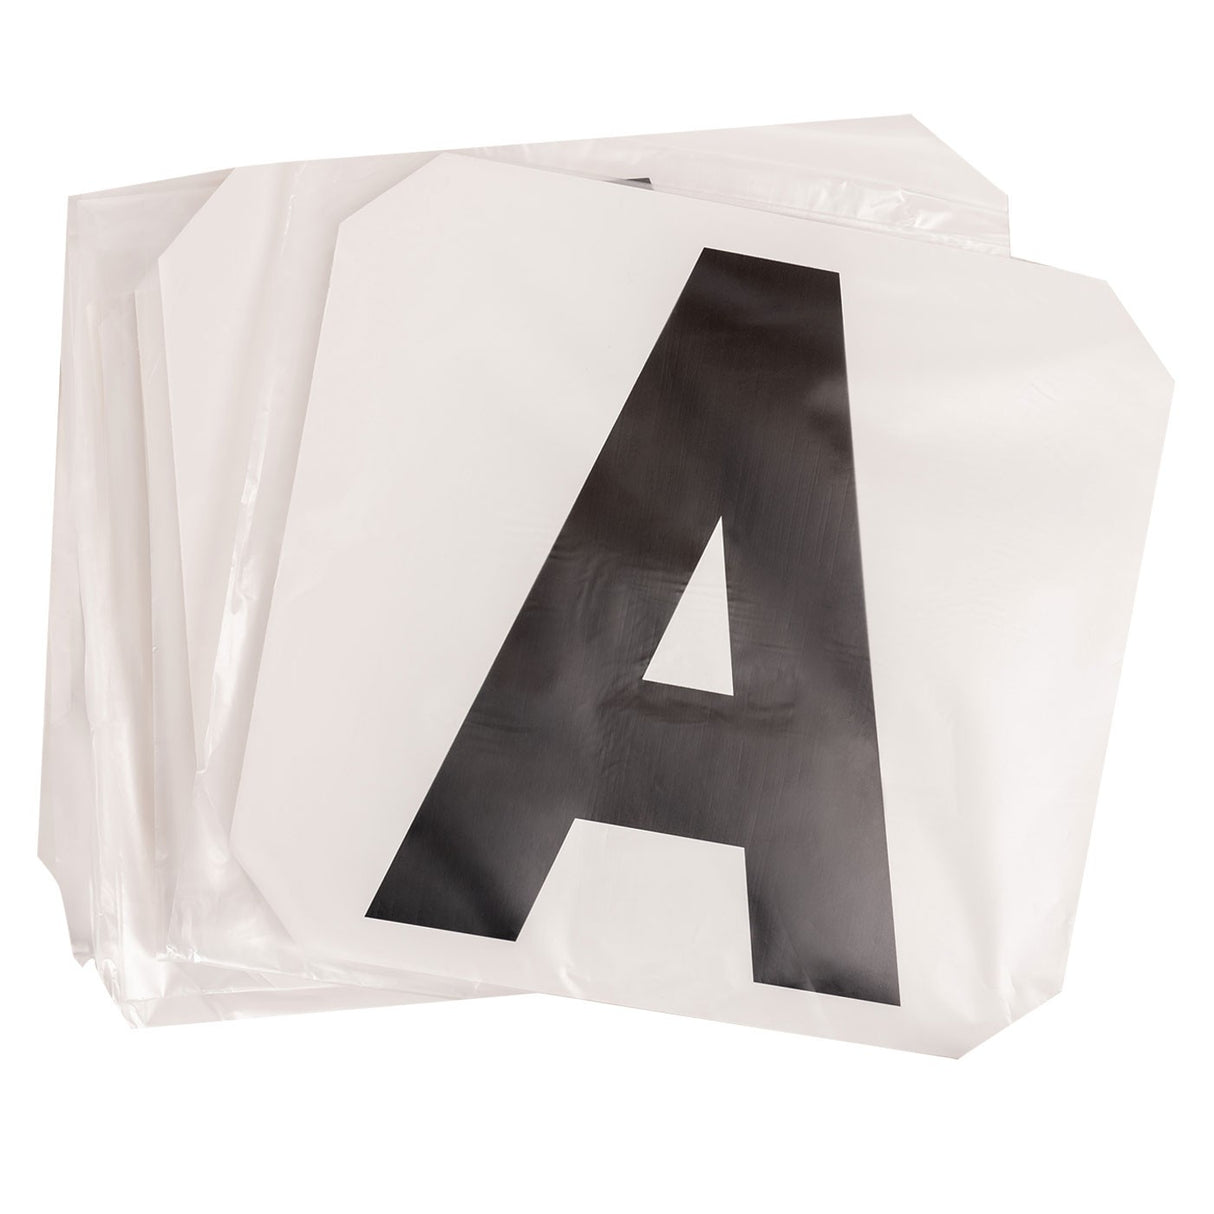 Dressage Arena Replacement Letters (AKEHCMBF)